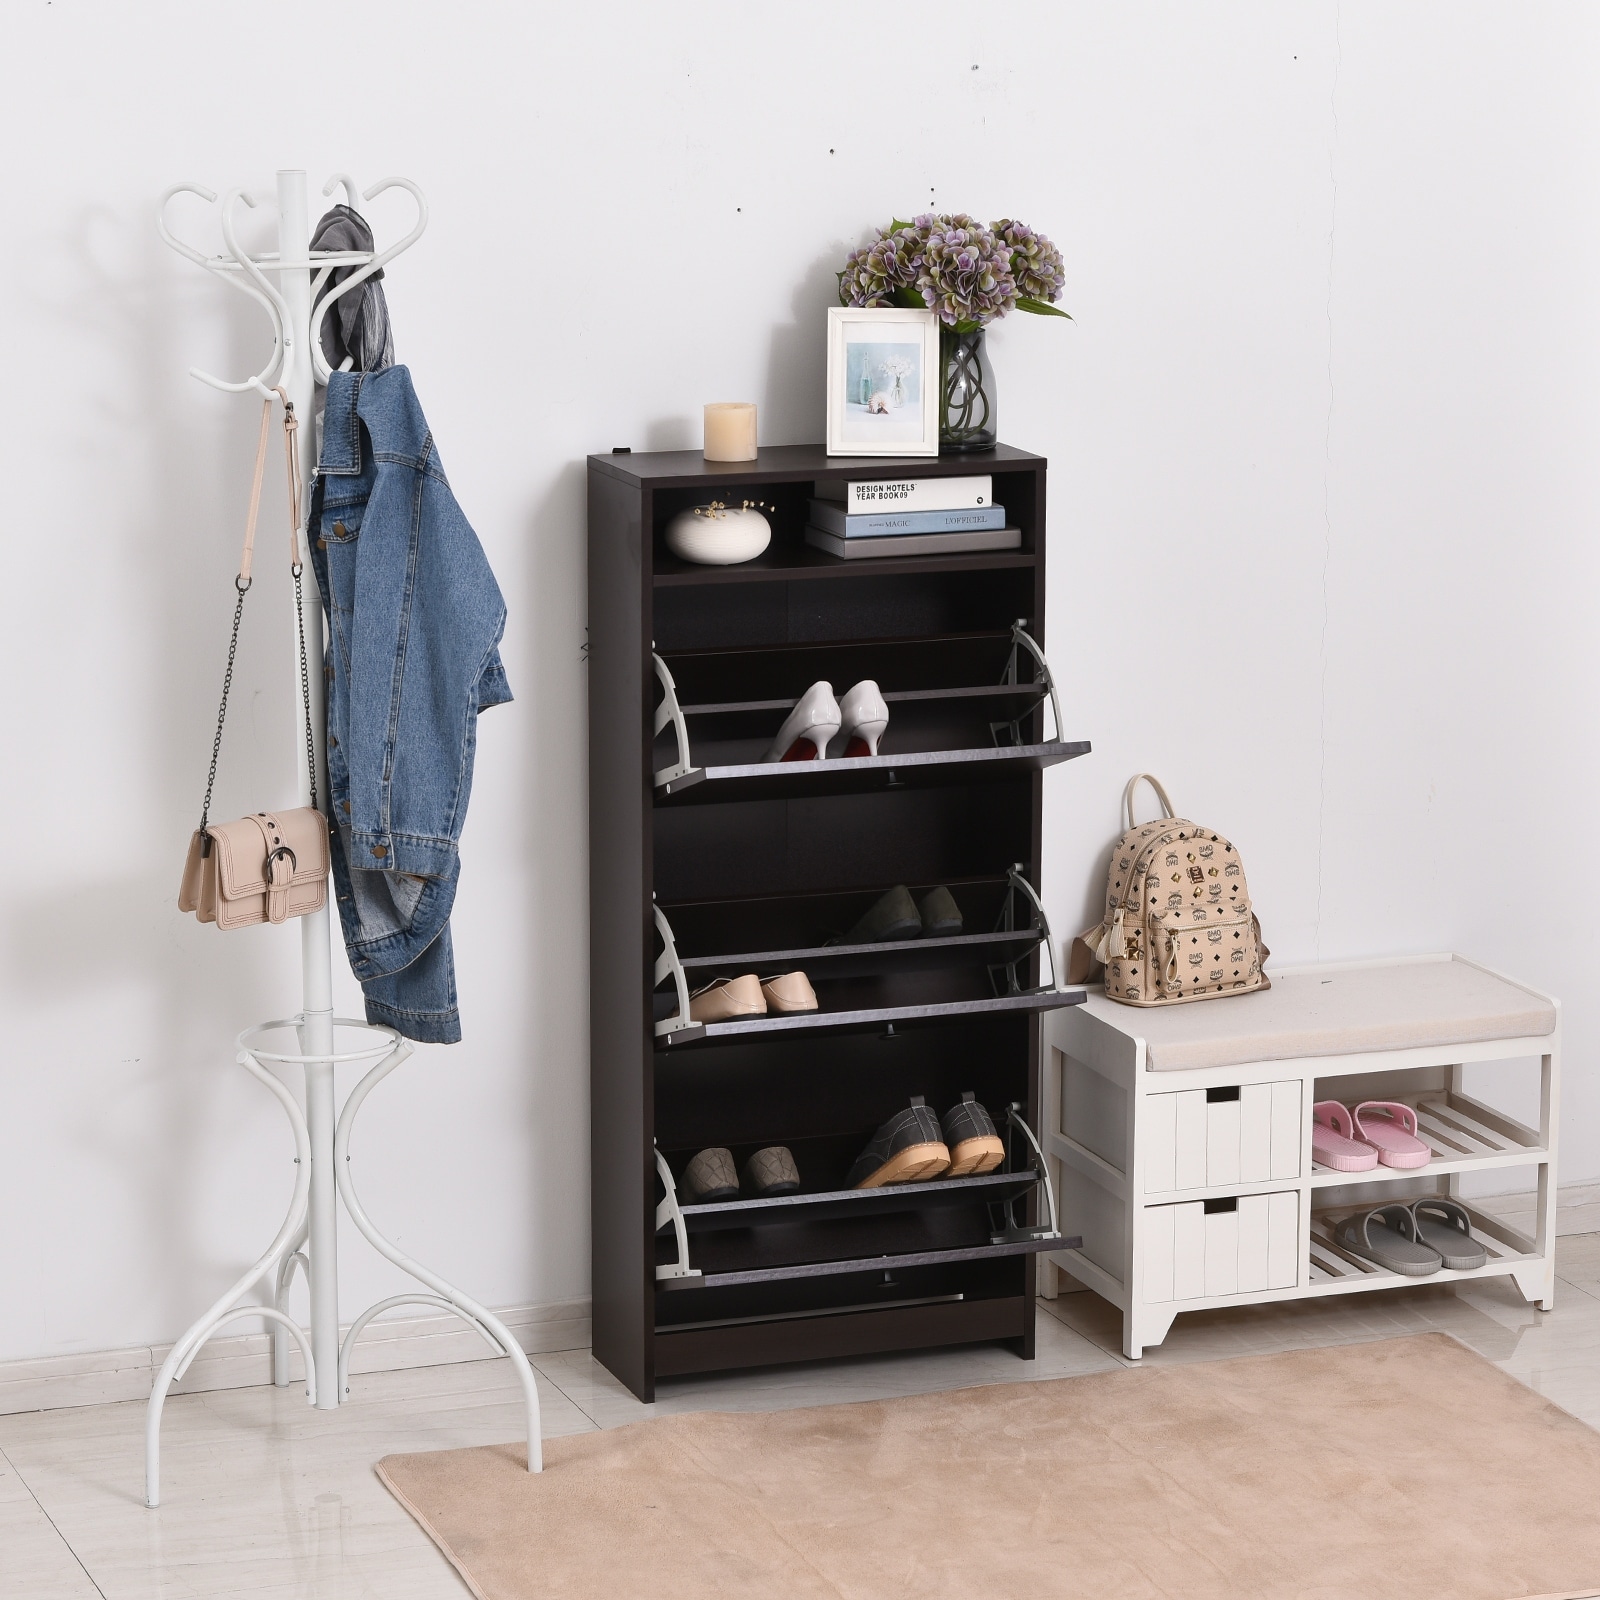 https://ak1.ostkcdn.com/images/products/is/images/direct/ede29be934a1bd14c7dae9ee4358e69edfddc59b/HomCom-Trendy-Shoe-Storage-Cabinet-with-3-Large-Fold-out-Drawers-%26-a-Spacious-Top-Surface-for-Small-Items.jpg